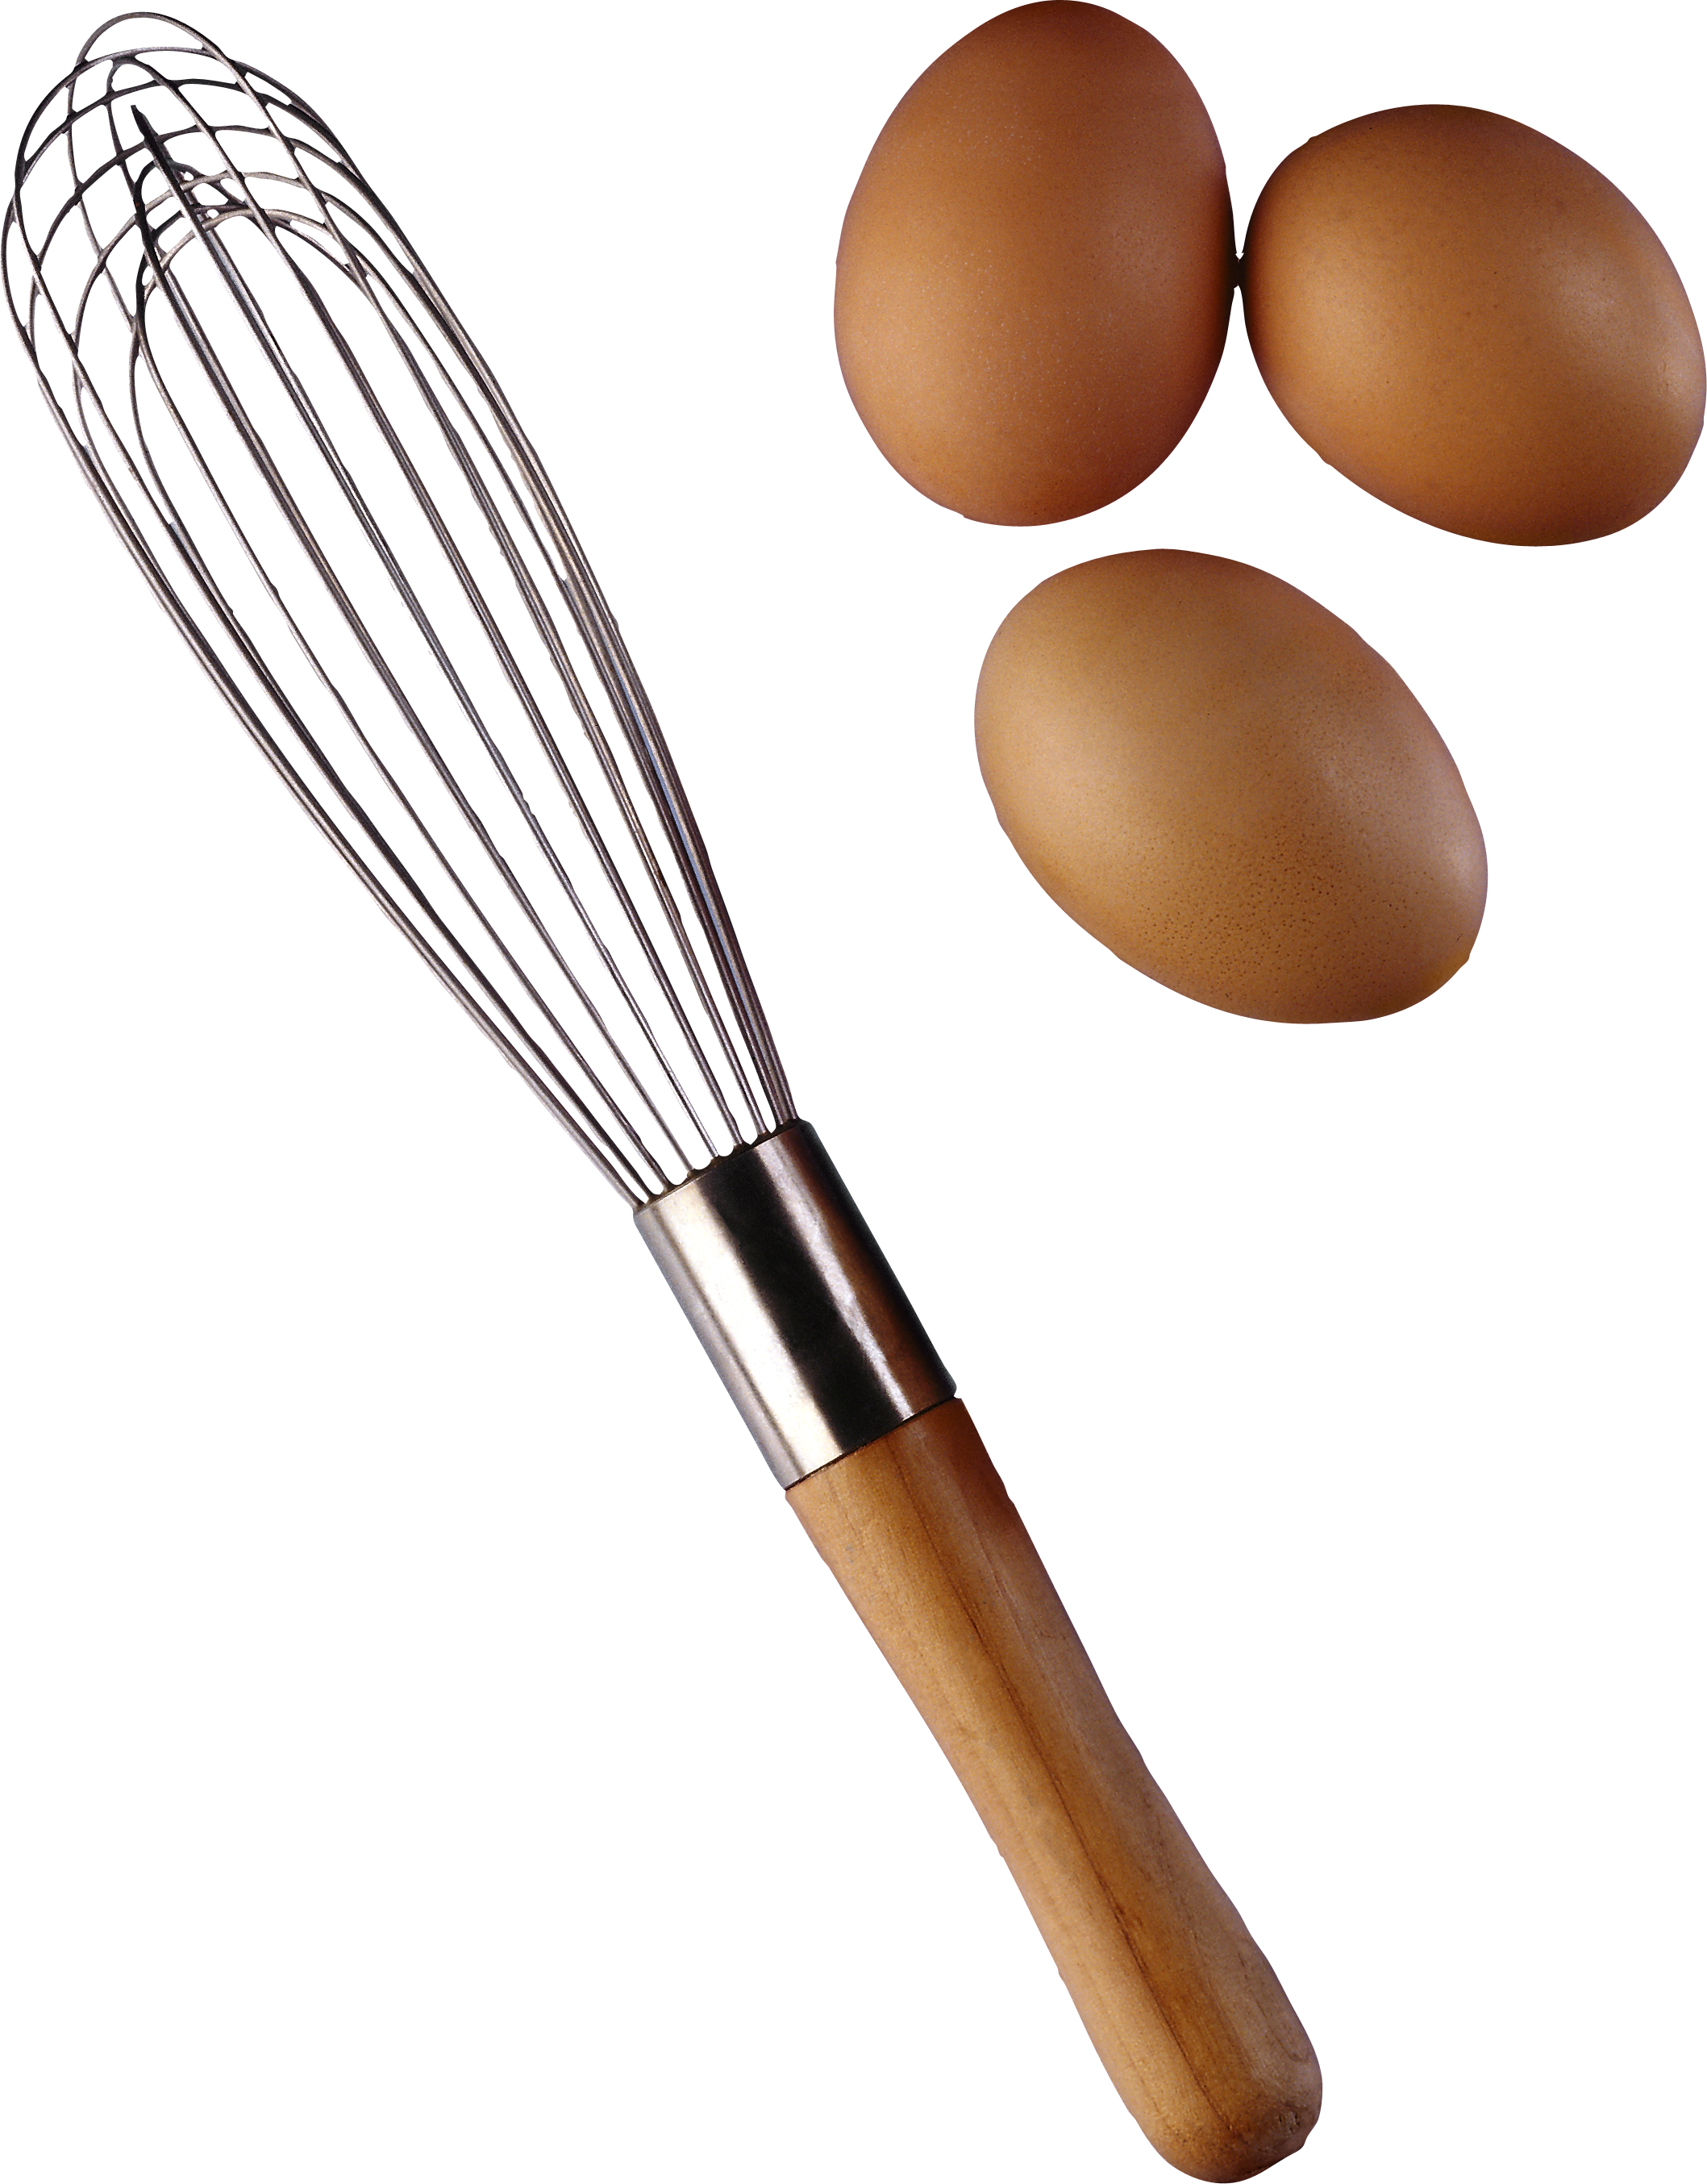 Three eggs with Beater PNG Image